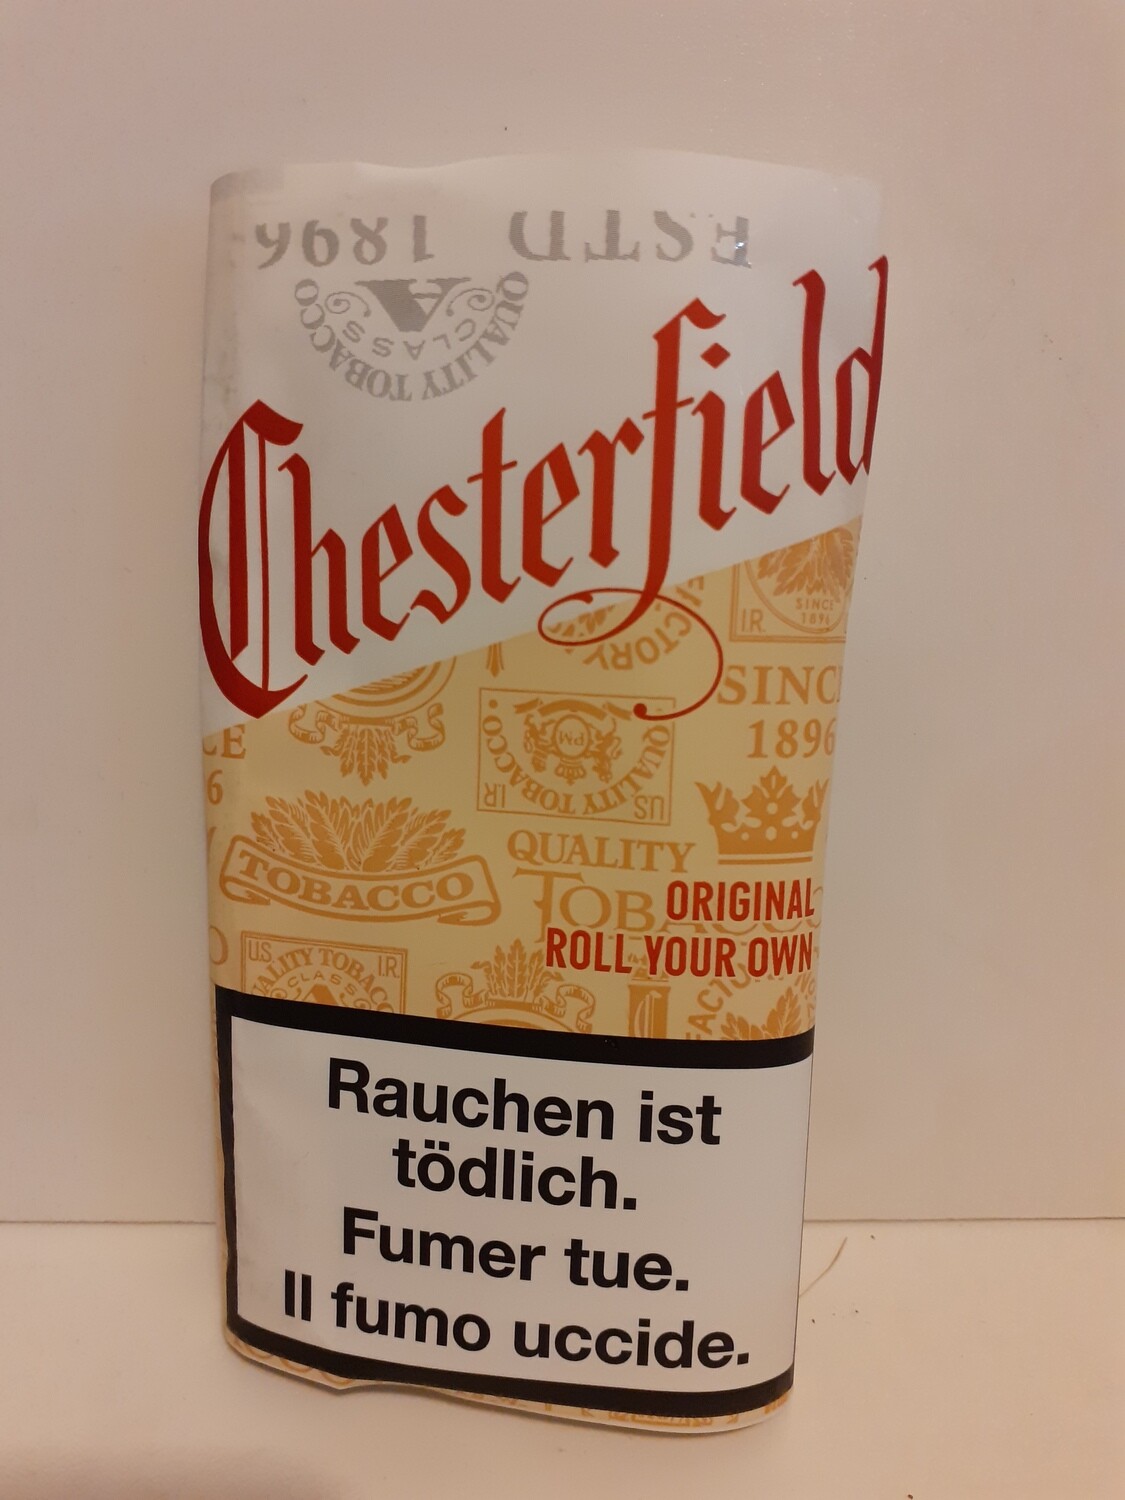 Chesterfield Tabac à rouler 30 g